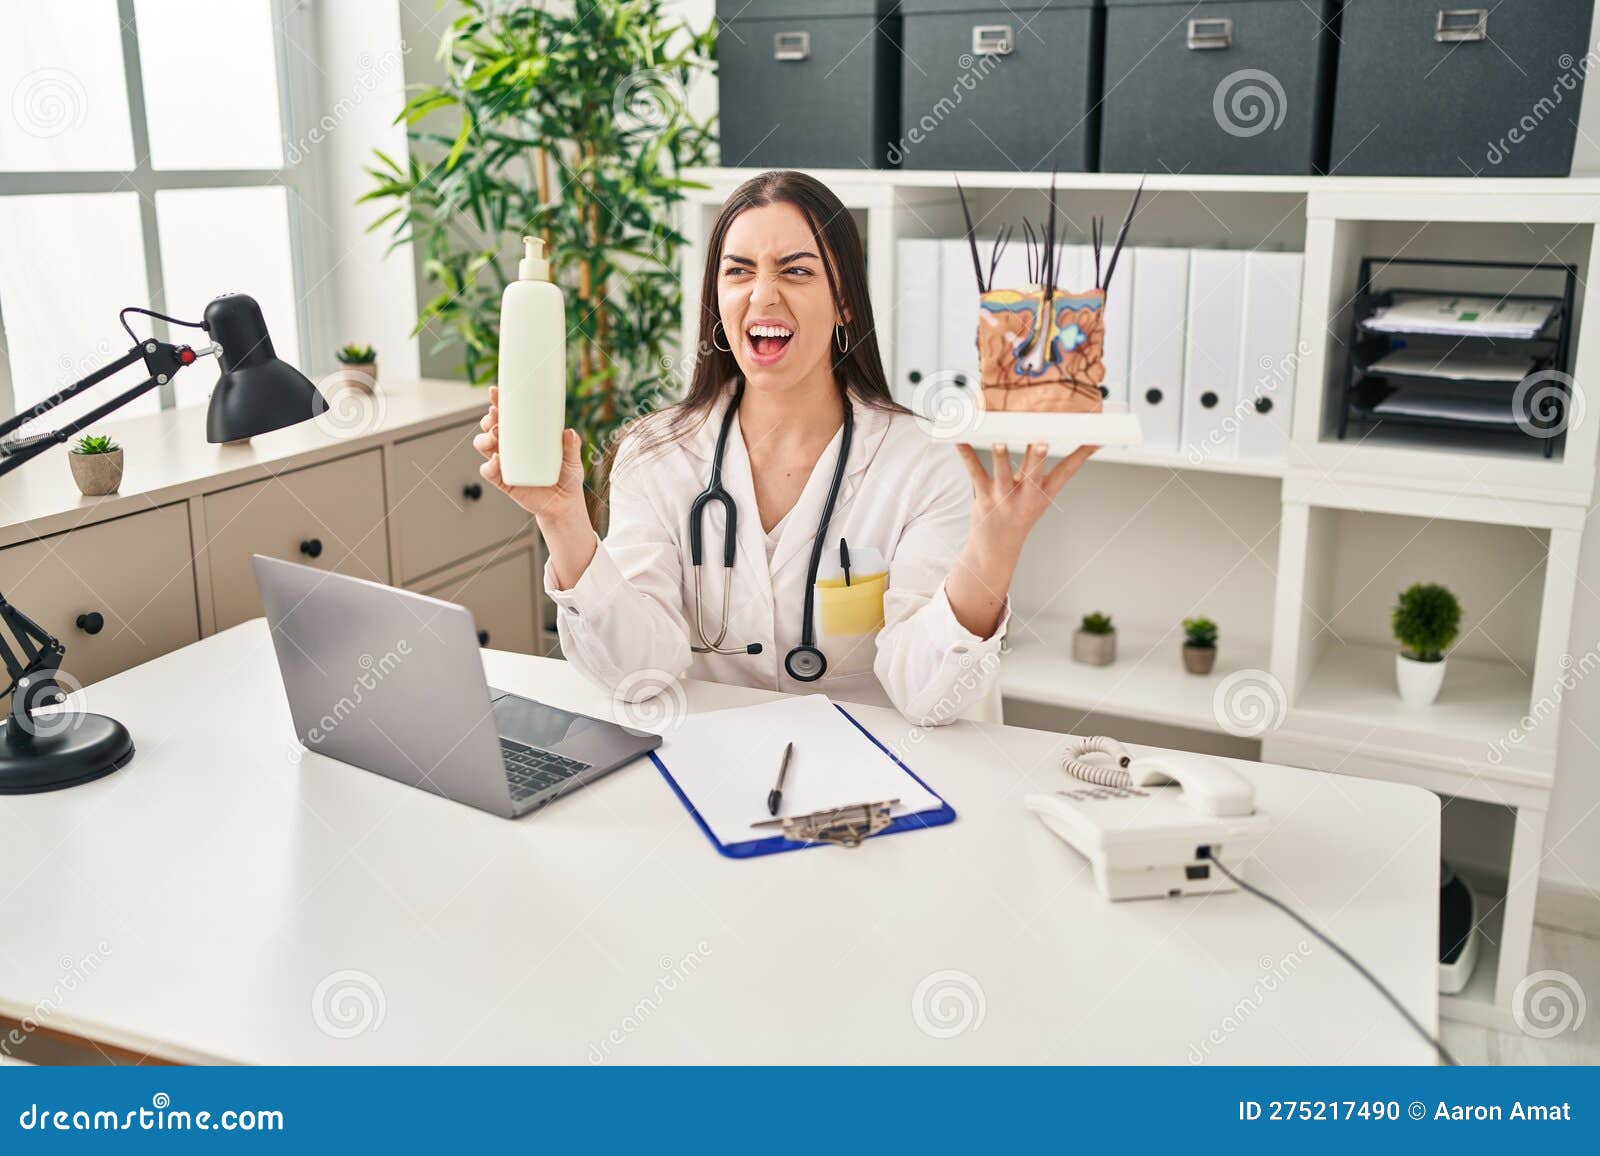 hispanic doctor woman holding model of human anatomical skin and hair angry and mad screaming frustrated and furious, shouting